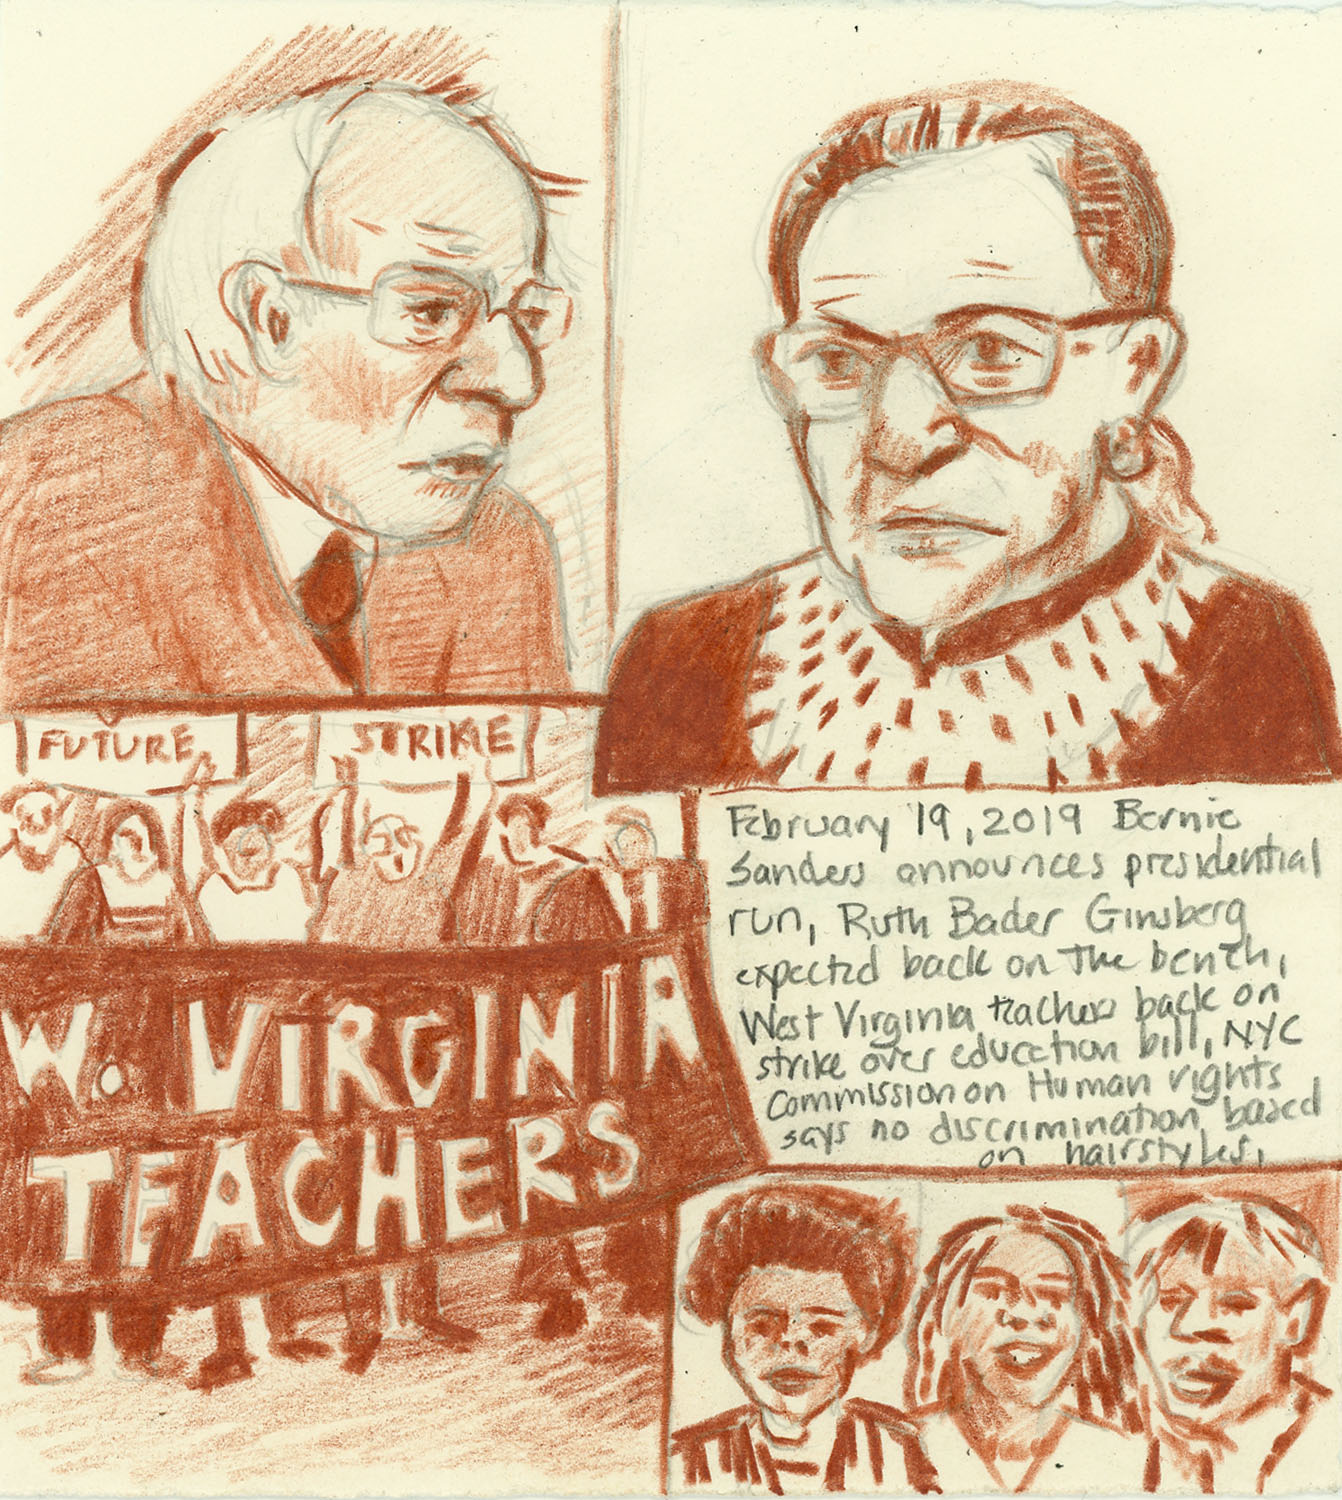 Day 1,186 (Feb. 19, 2019)<br>Color pencil, graphite on paper, 5 ½ x 5 in.<br><i>Bernie Sanders announces presidential run, Ruth Bader Ginsberg expected back on the bench, West Virginia teachers back on strike over education bill, NYC Commission on Human rights says no discrimination based on hairstyles.</i>